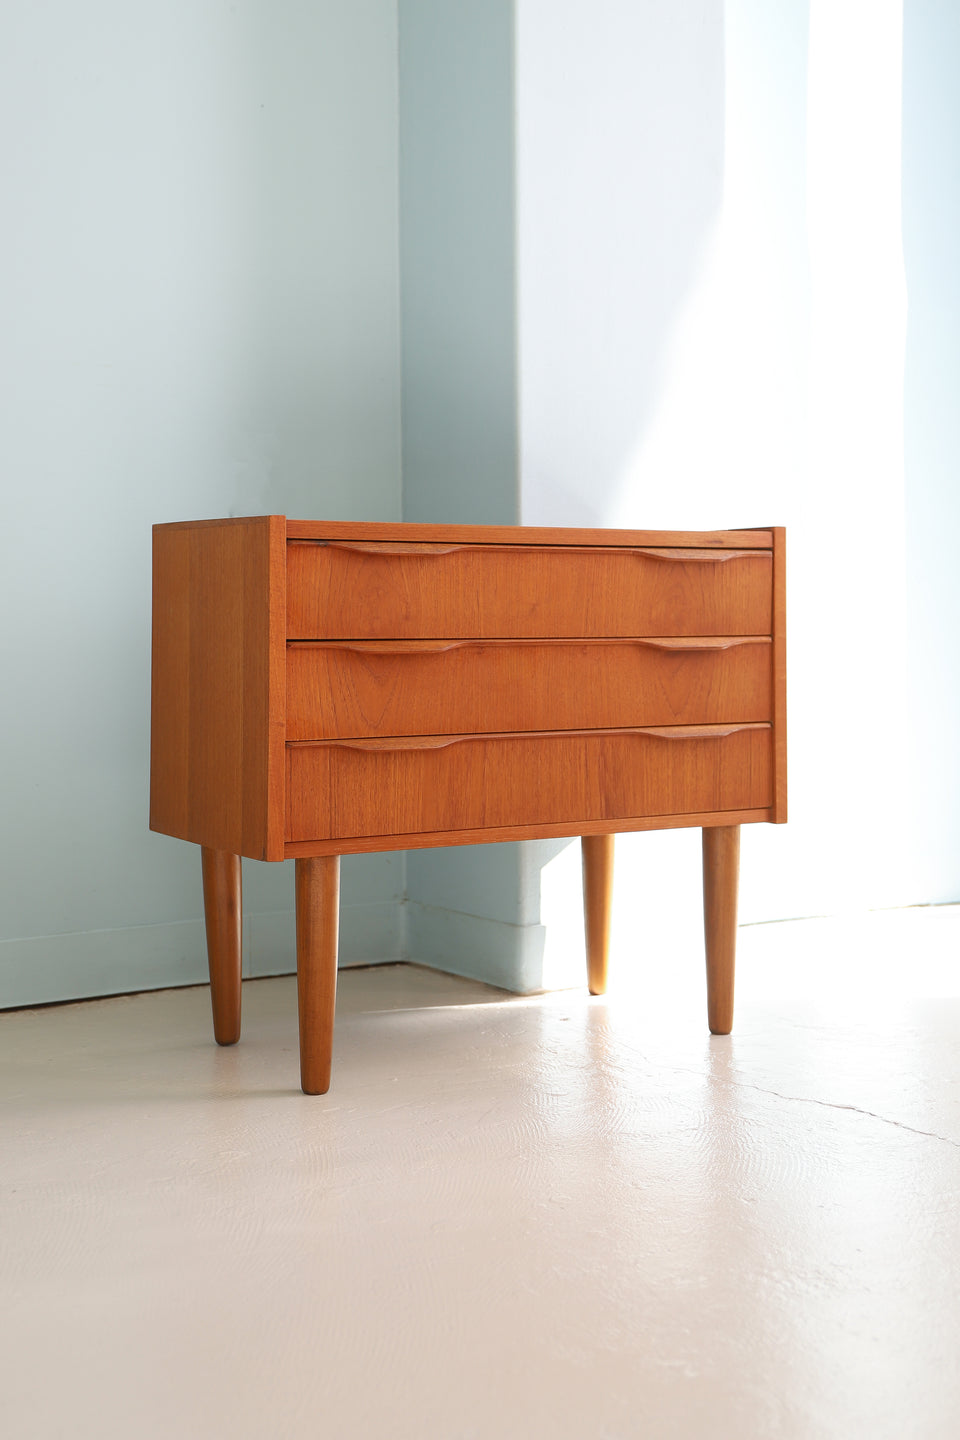 Danish Vintage Bed Side Chest 3Drawers/デンマークヴィンテージ 3段 ベッドサイドチェスト チーク材 北欧家具